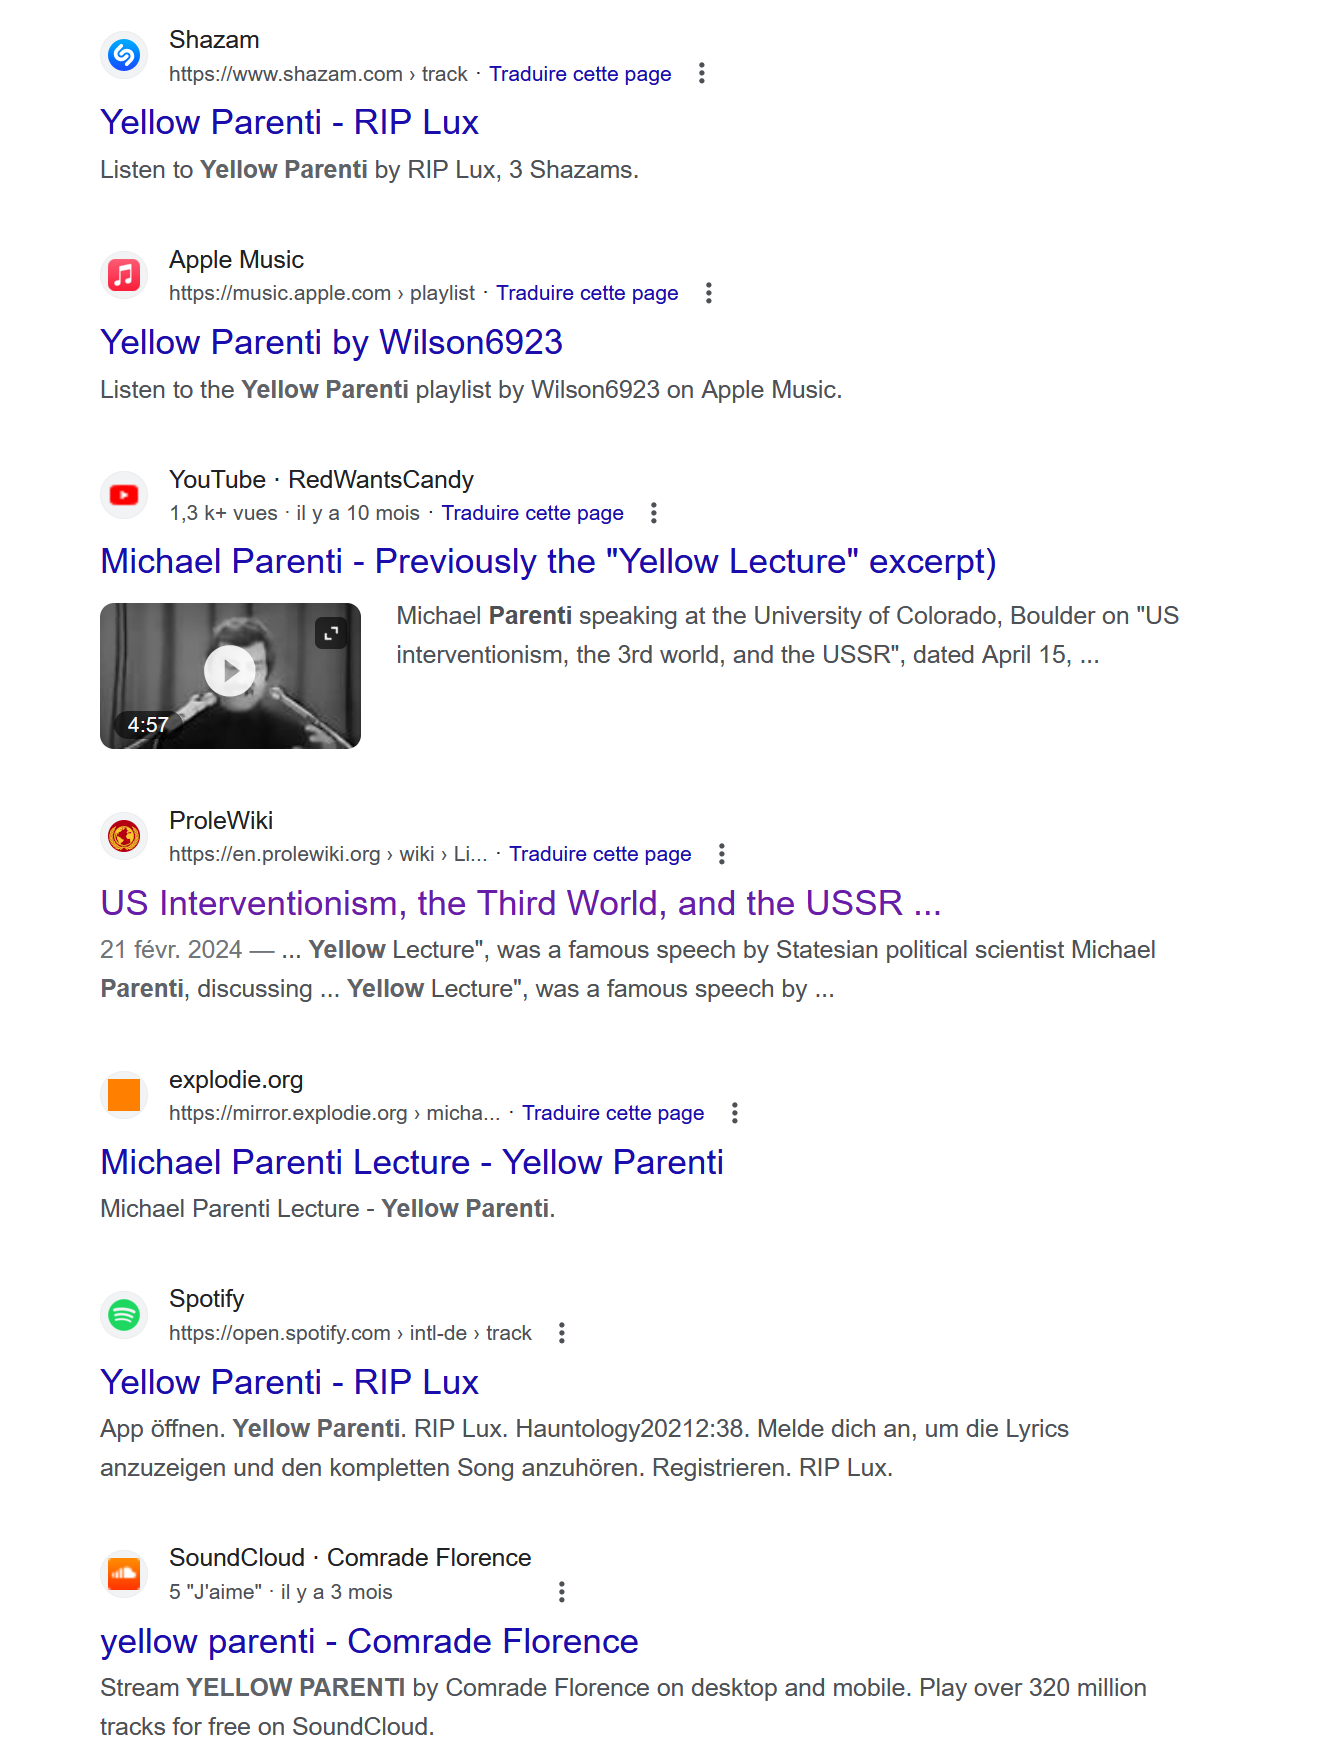 Google results for keyword "yellow parenti".png